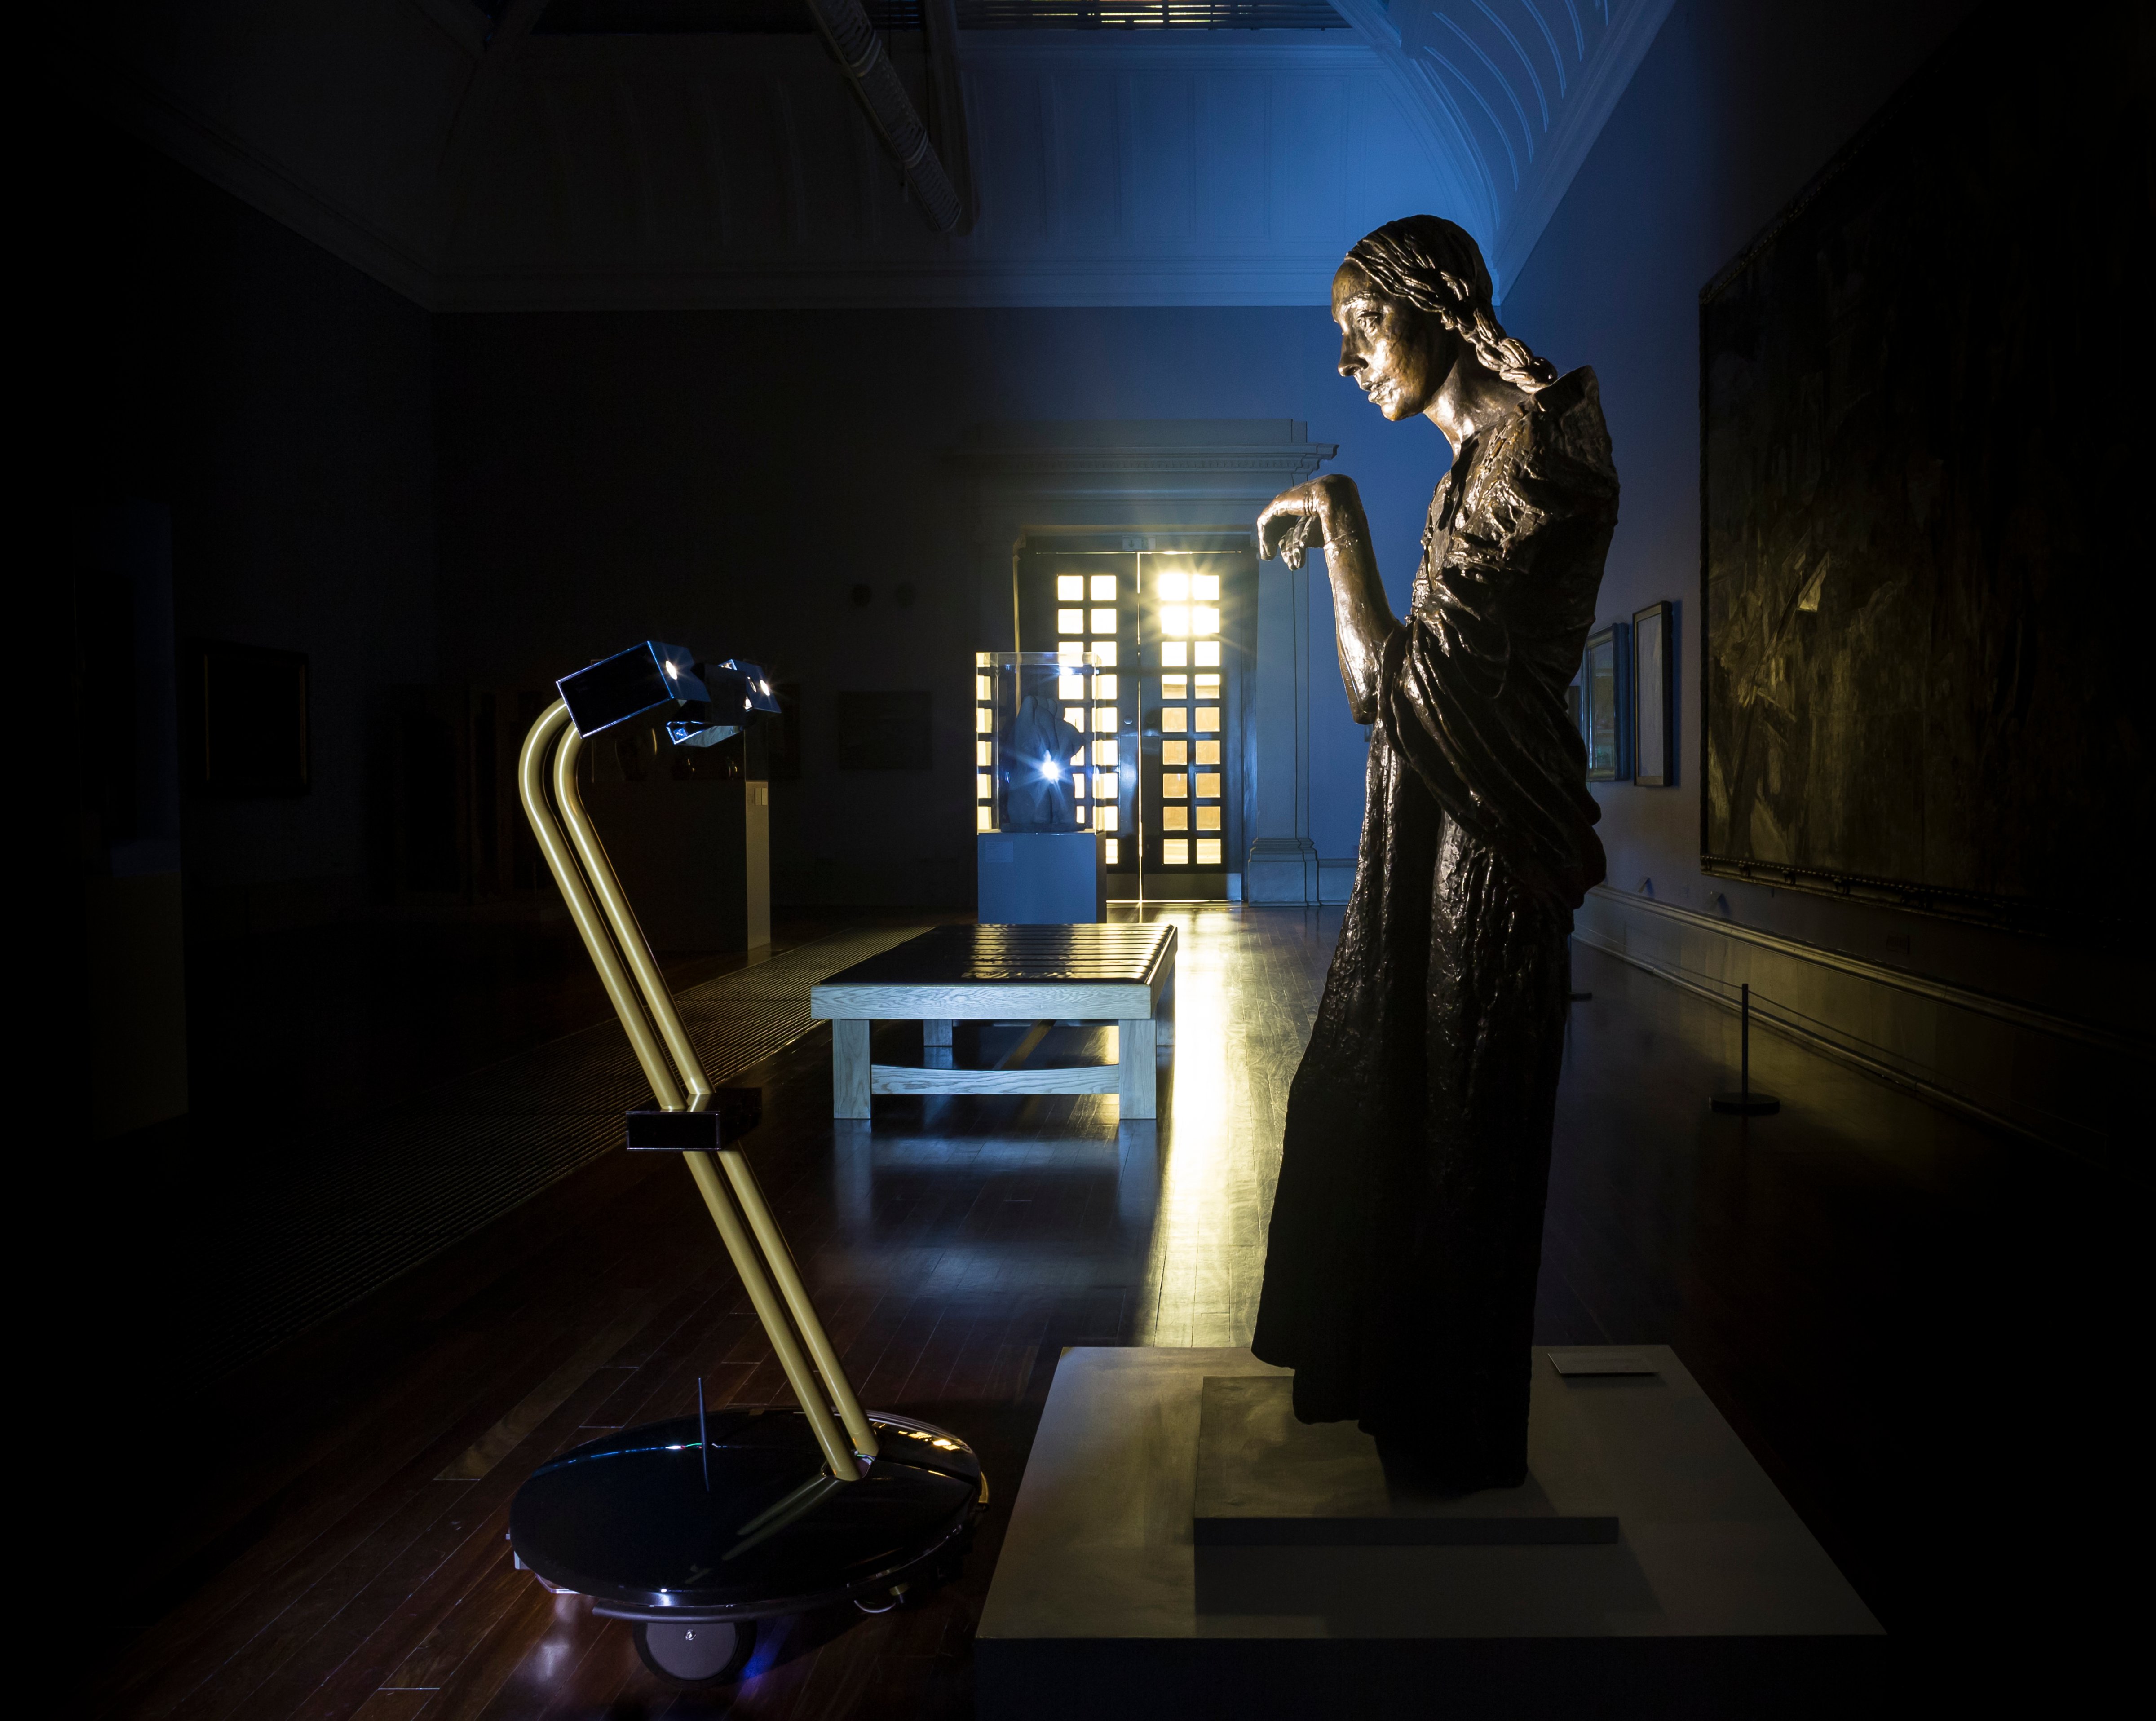 After Dark project robot with Jacob Epstein's The Visitation (1926) at Tate Britain (Alexey Moskvin&mdash;Alexey Moskvin)